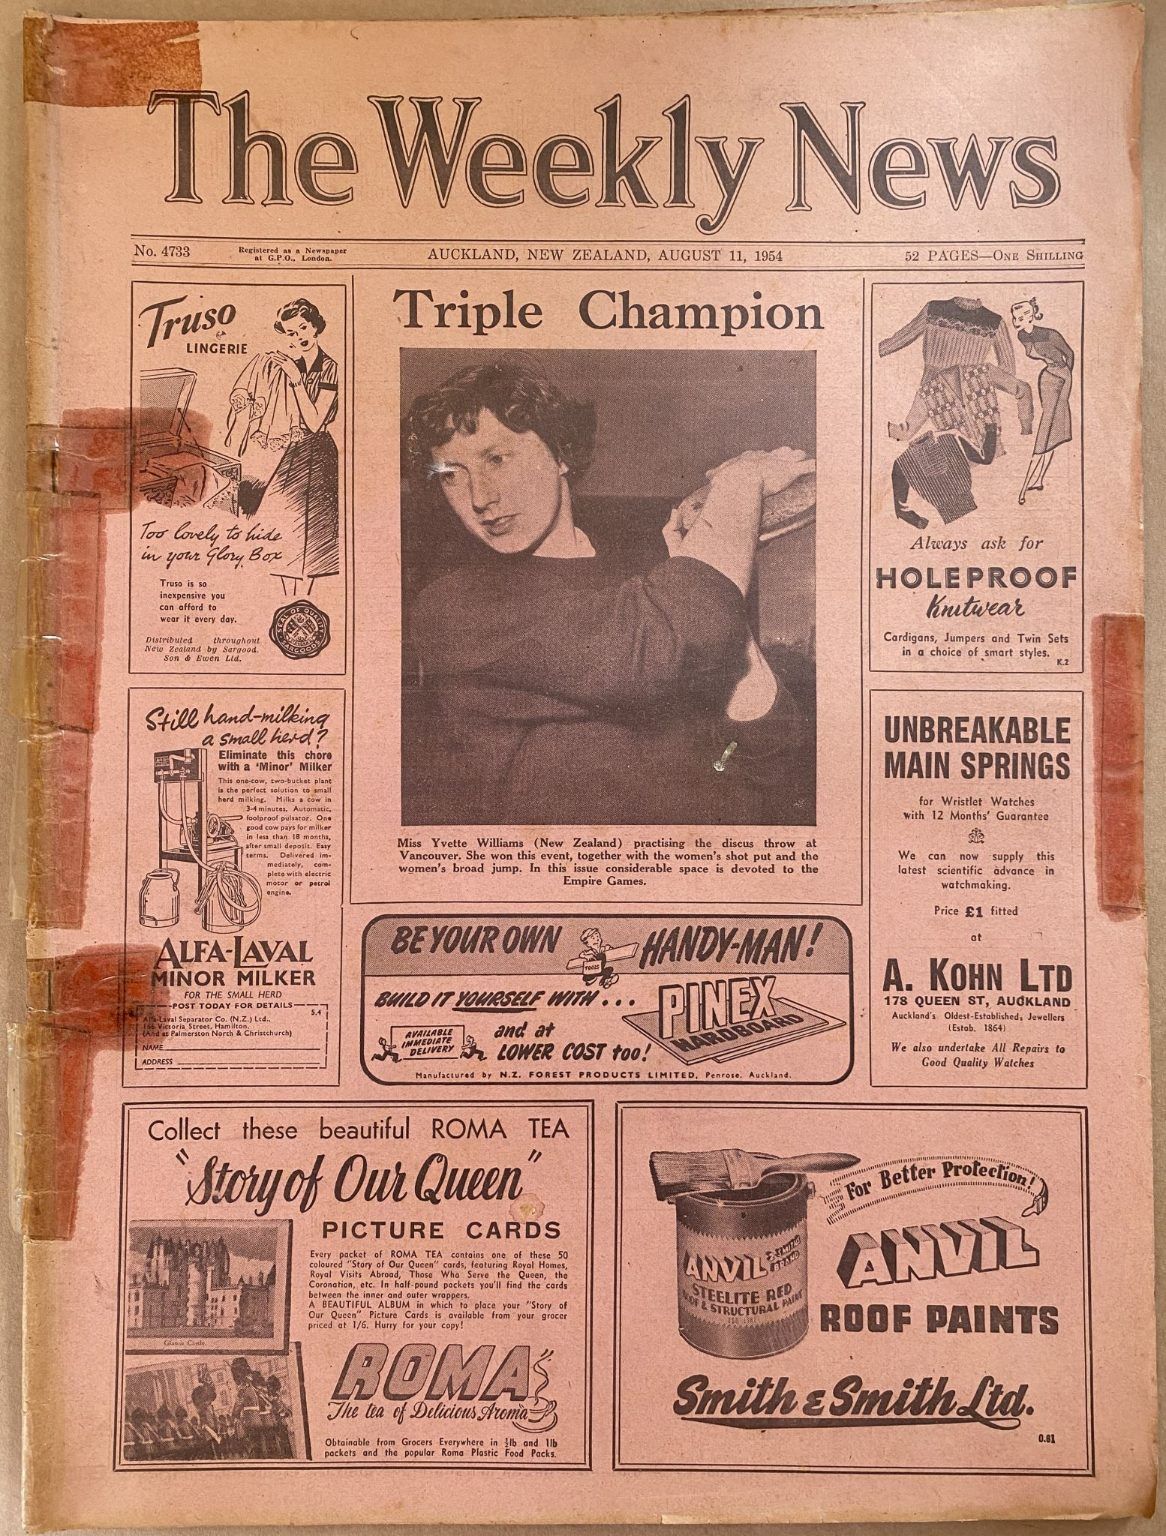 OLD NEWSPAPER: The Weekly News - No. 4733, 11 August 1954